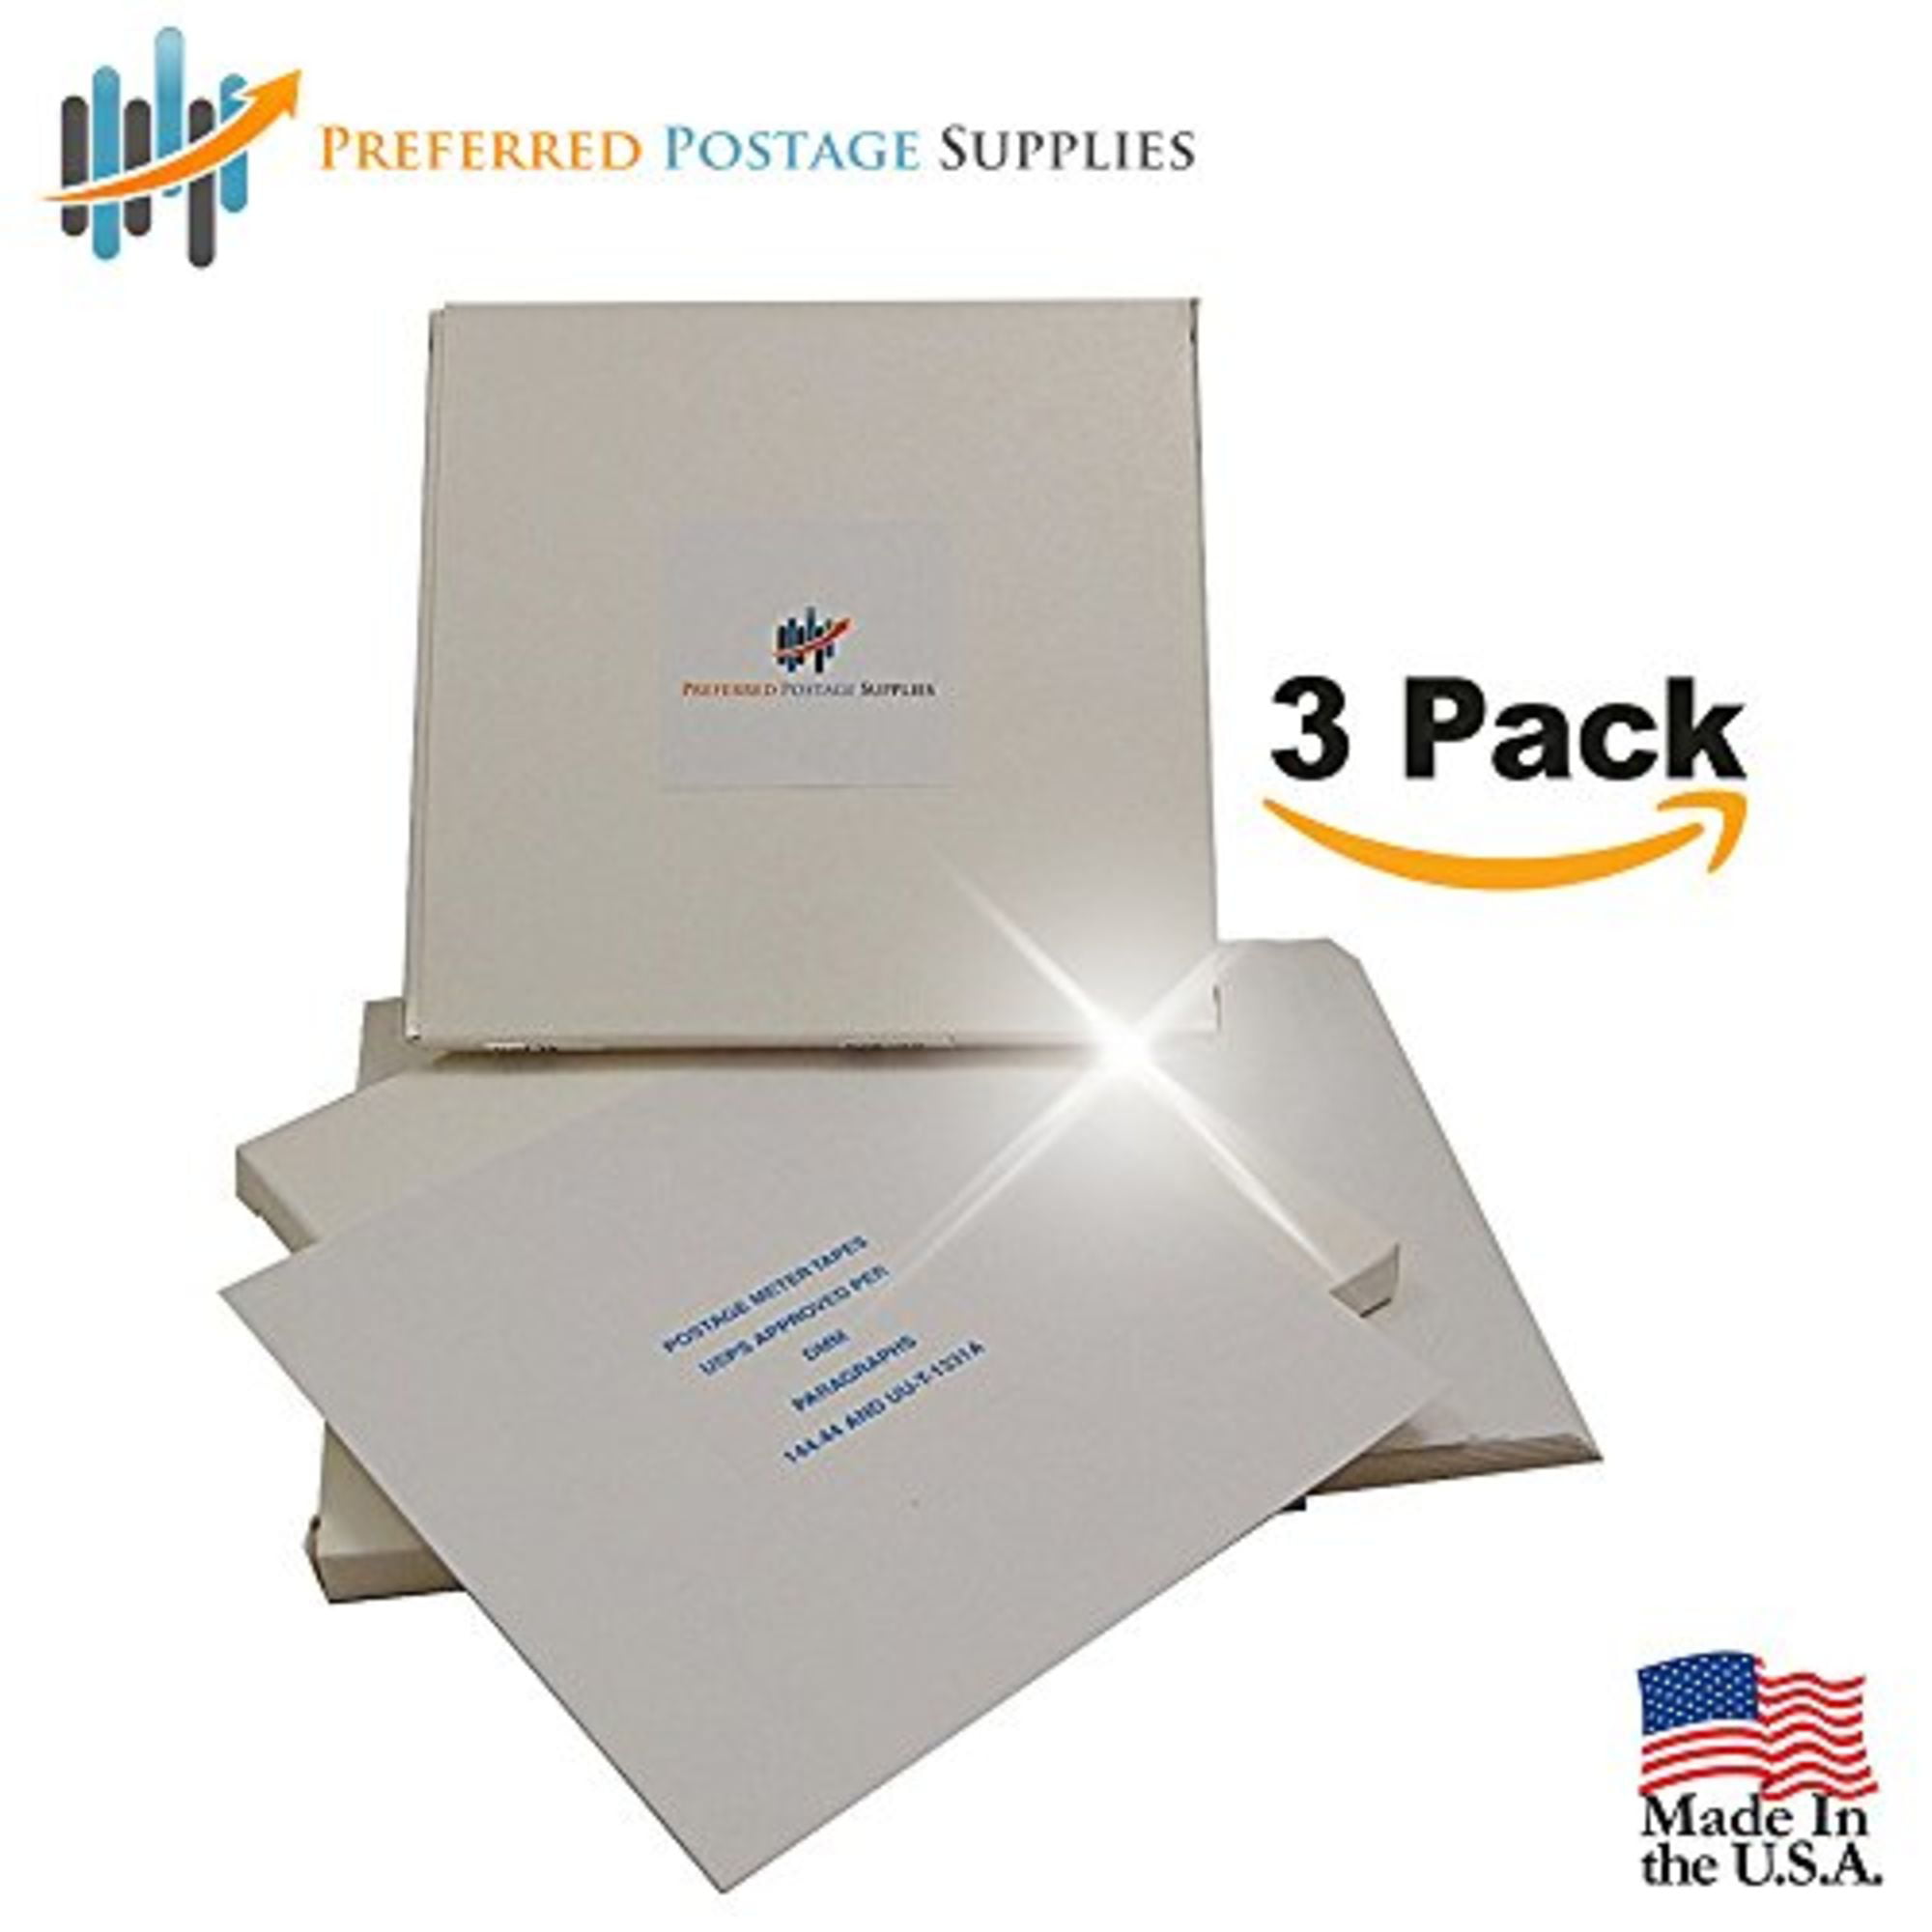 4 Pack Pitney Bowes and Francotyp Postalia by Preferred Postage Supplies Premium Adhesive/Bright White 2400 Pinwheel Postage Meter Tapes 5x5 Compatible with Hasler Neopost 